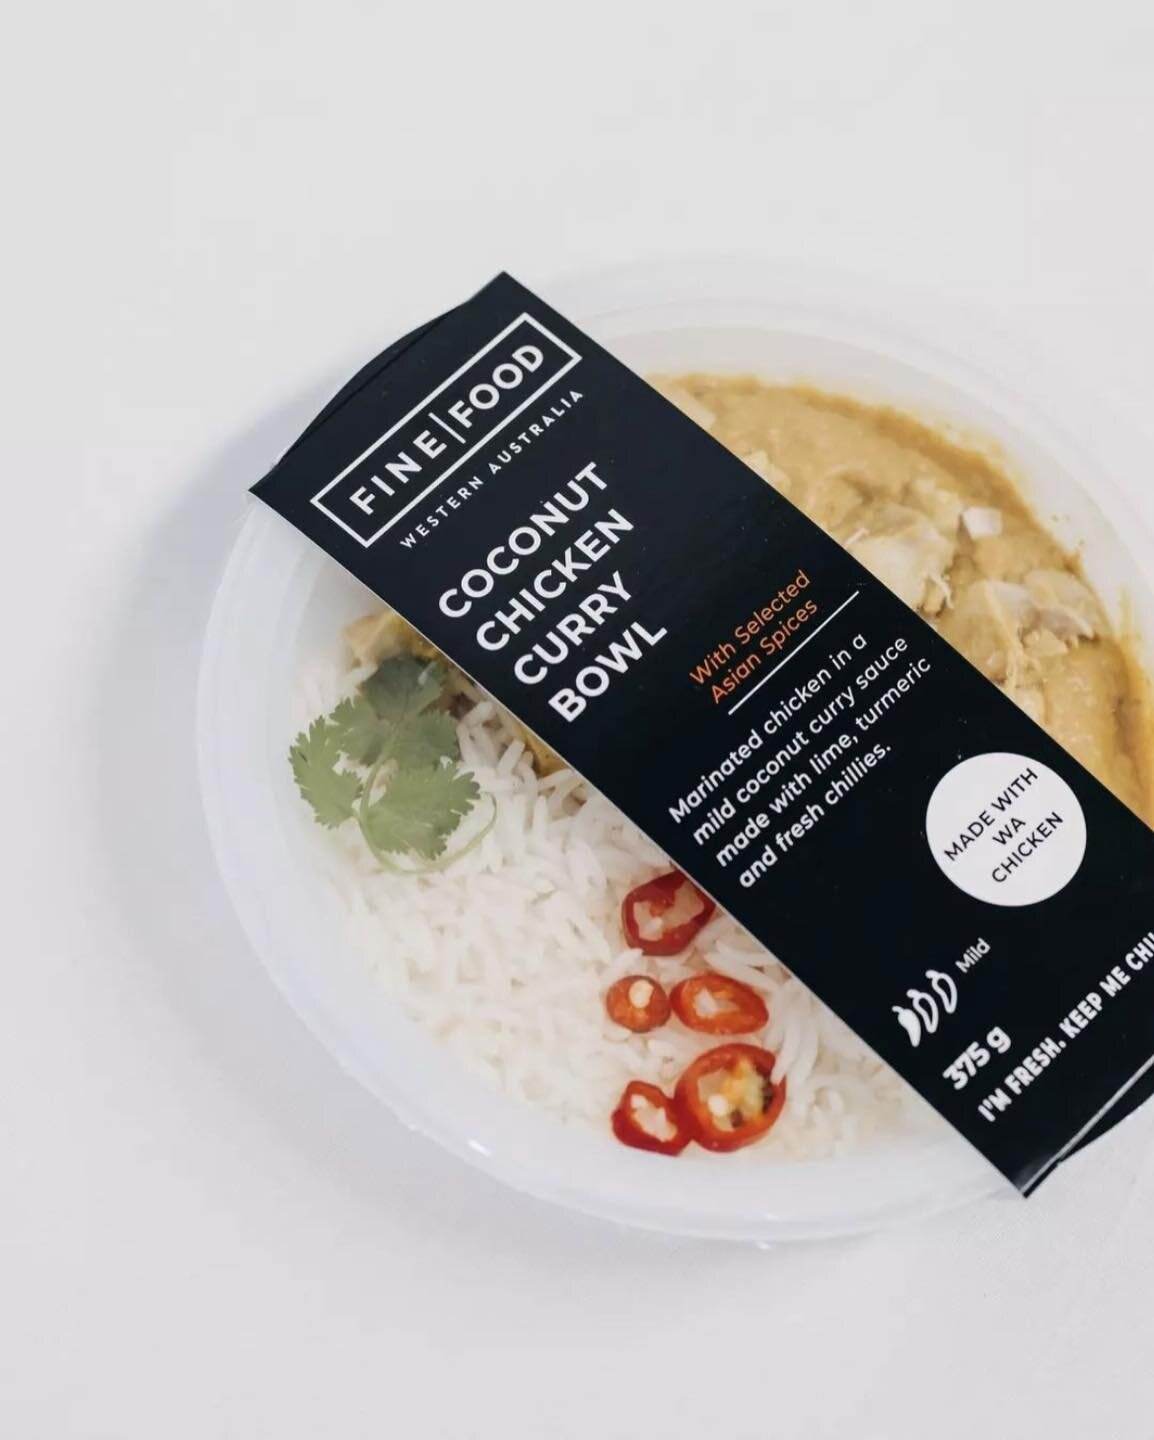 Have you tried our new range of Fine Foods WA ready made meals?

Fine Foods WA Coconut Chicken Curry Bowl - its super creamy with warming Asian spices and made with fresh WA chicken breast pieces. Chef made just for you, and ready in just 3 minutes!
